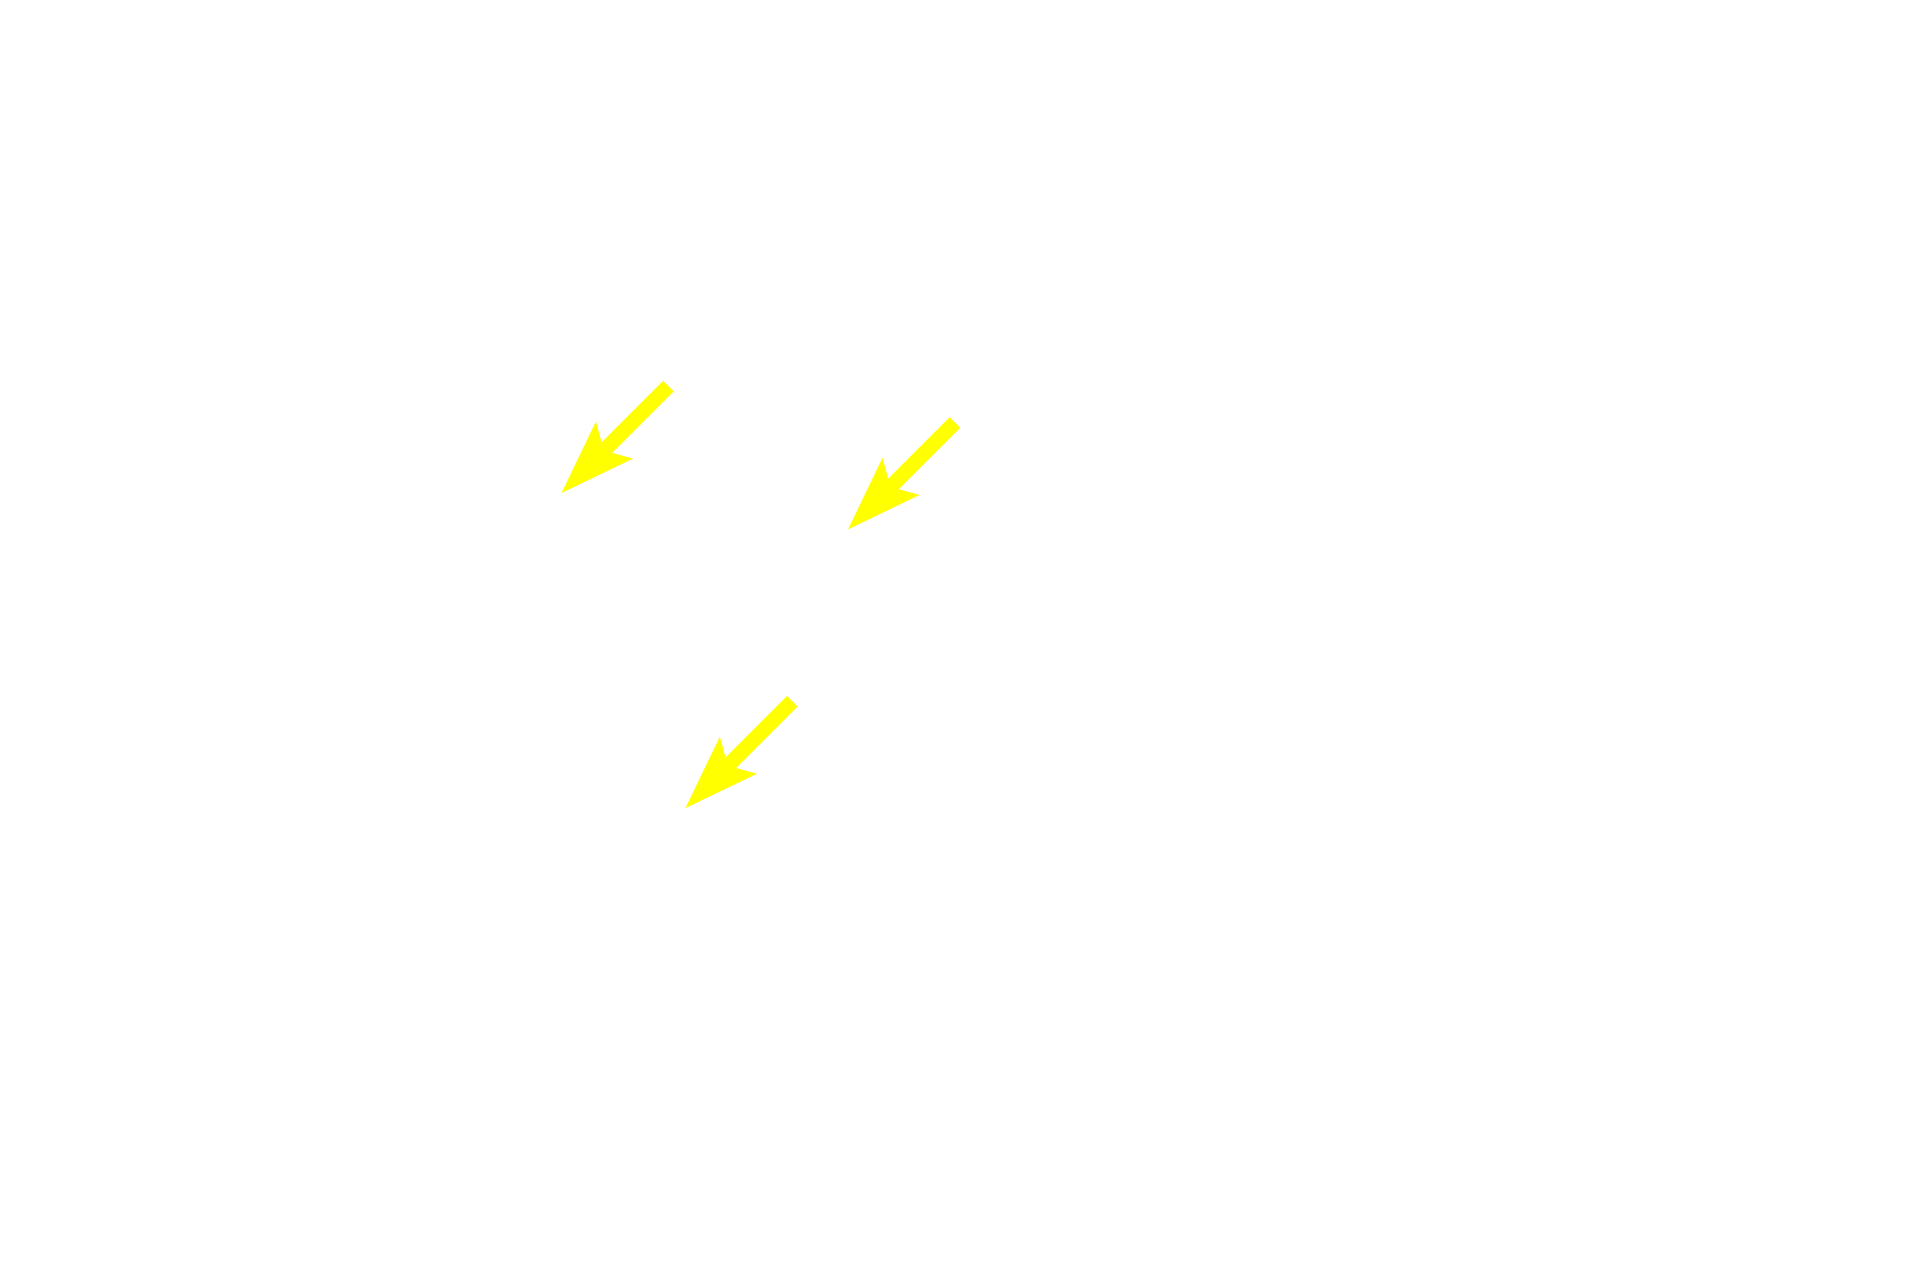 Late spermatids <p>Primary spermatocytes, the largest cells in the spermatogenic lineage, form from mitotic division of spermatogonia in the basal compartment. Primaries migrate through the blood-testis barrier and enter a prolonged period of prophase of meiosis I. Primary spermatocytes complete meiosis I, the reductional phase, to produce haploid secondary spermatocytes. 1000x</p>
